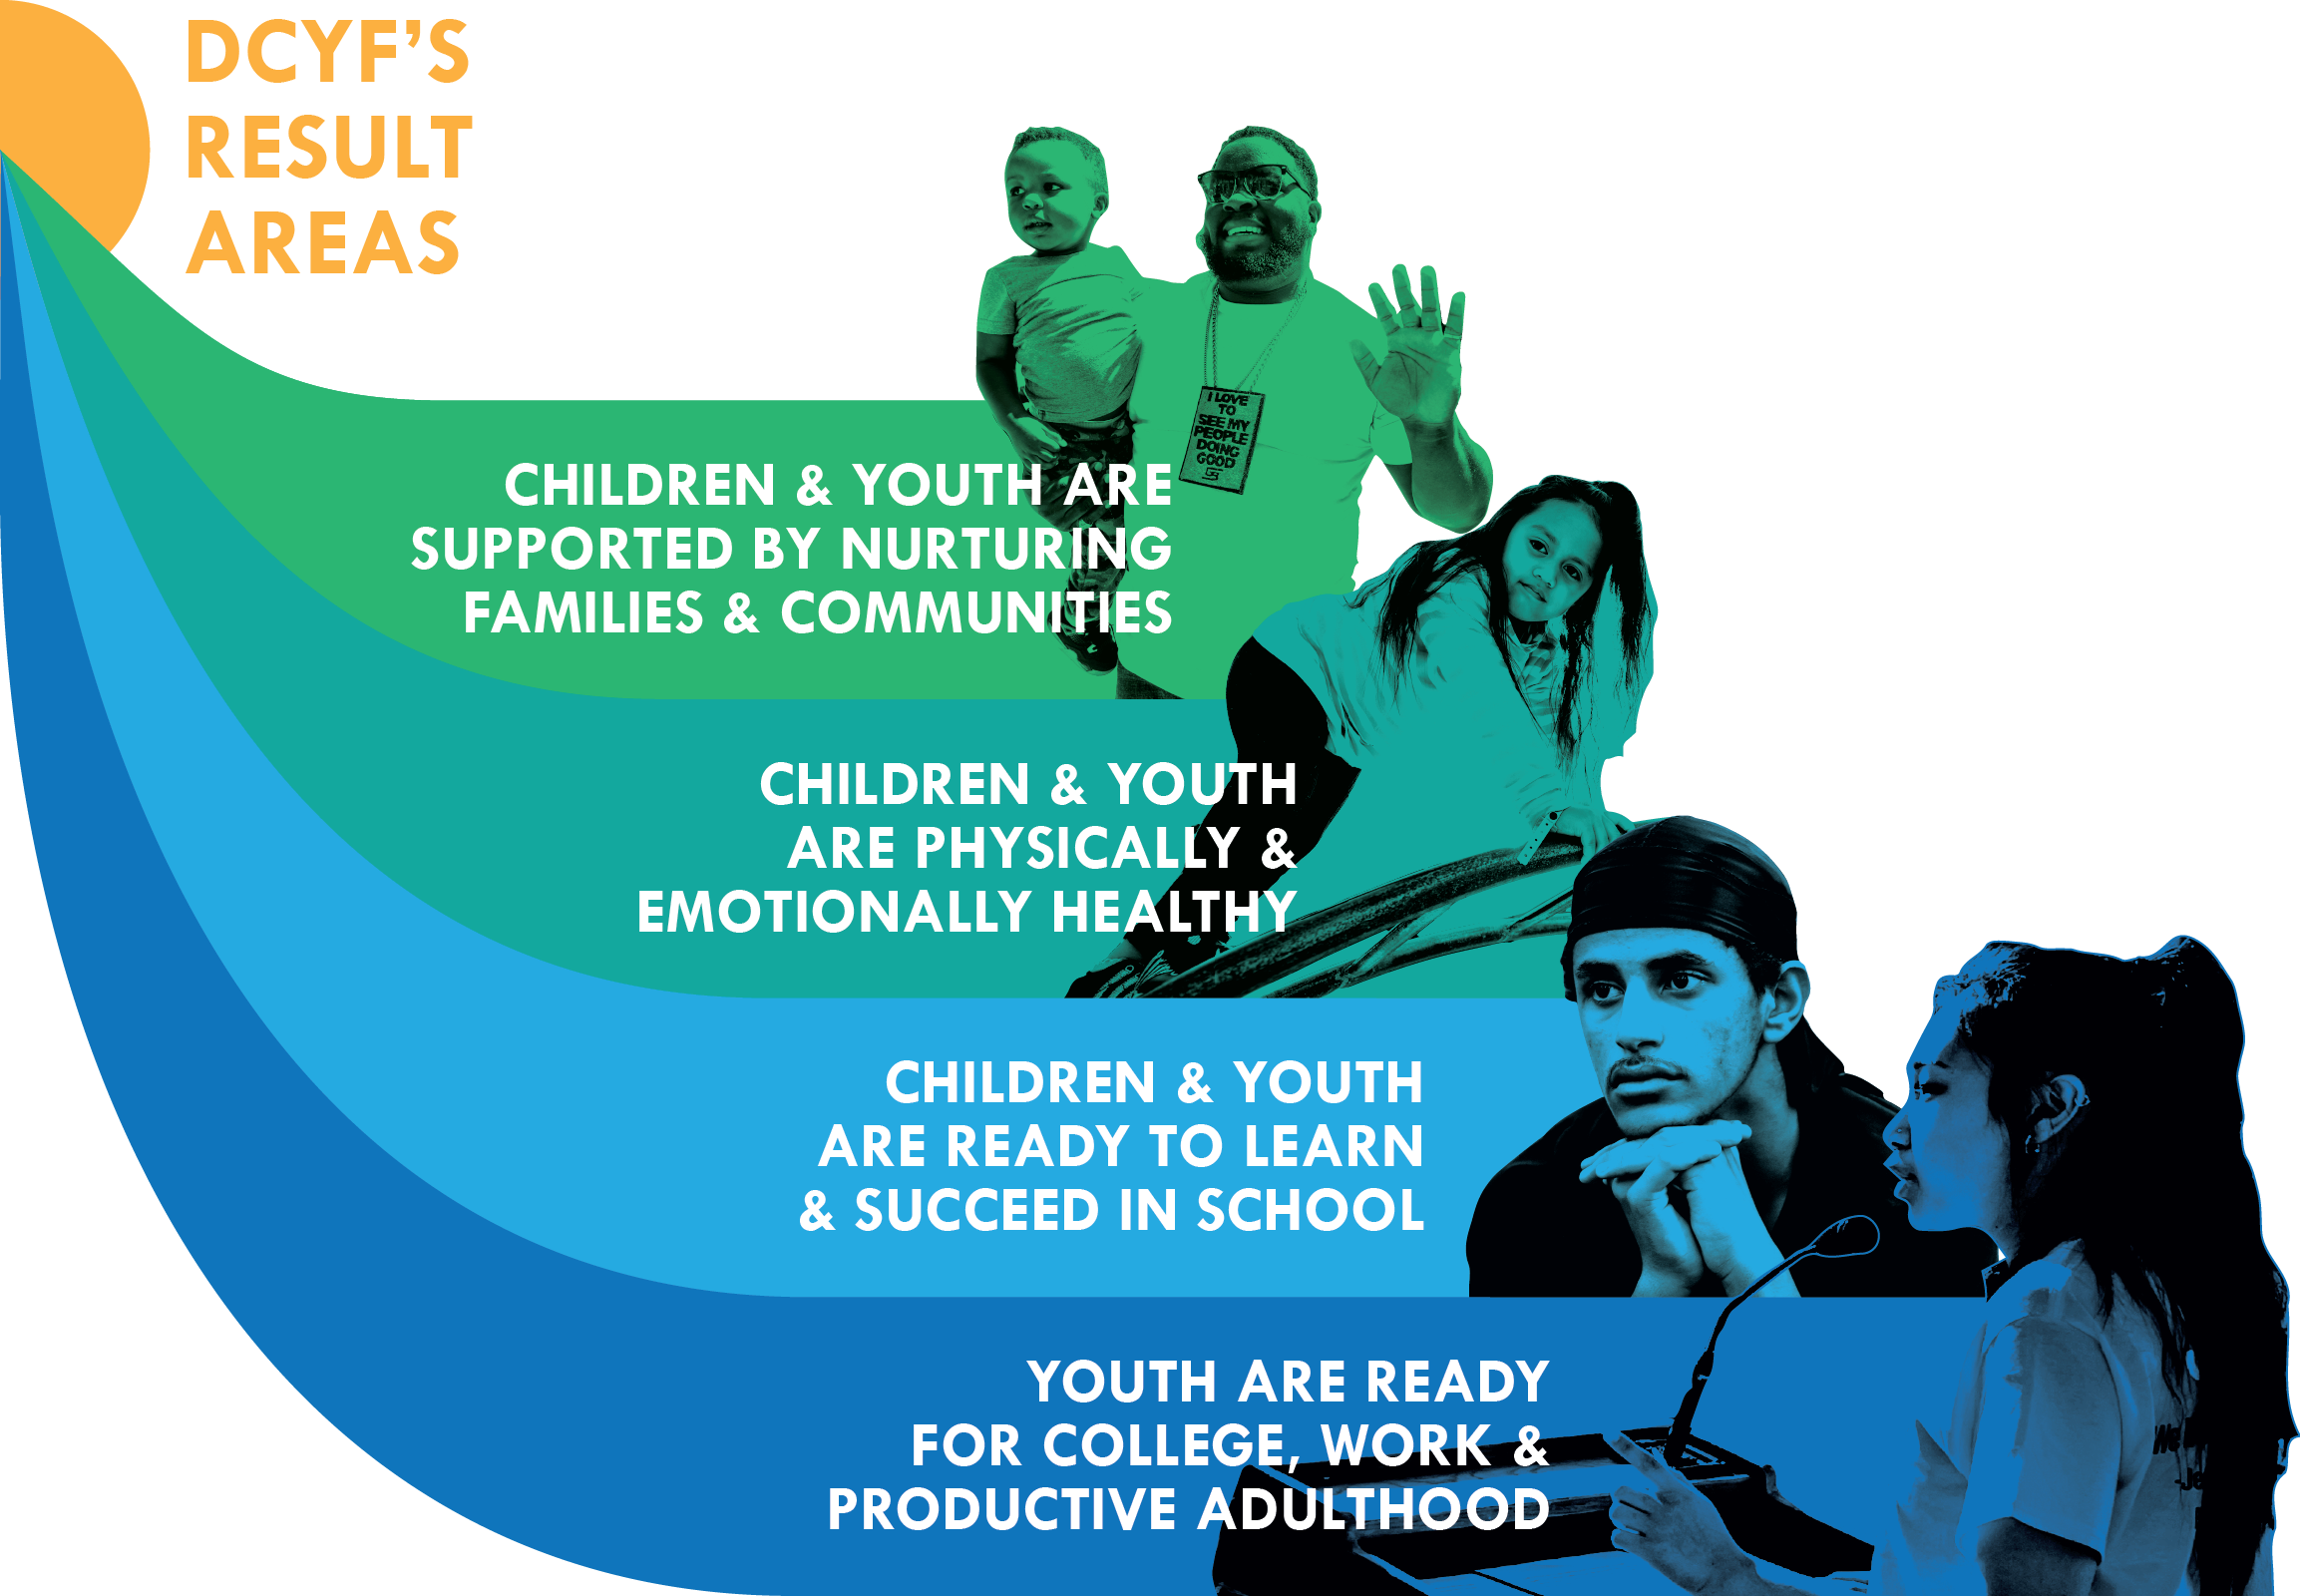 DCYF's result areas: all children and youth are supported by nurturing families and communities; all children and youth are physically and emotionally healthy; all children and youth are ready to learn and succeed in school; all youth are ready for college, work, and productive adulthood